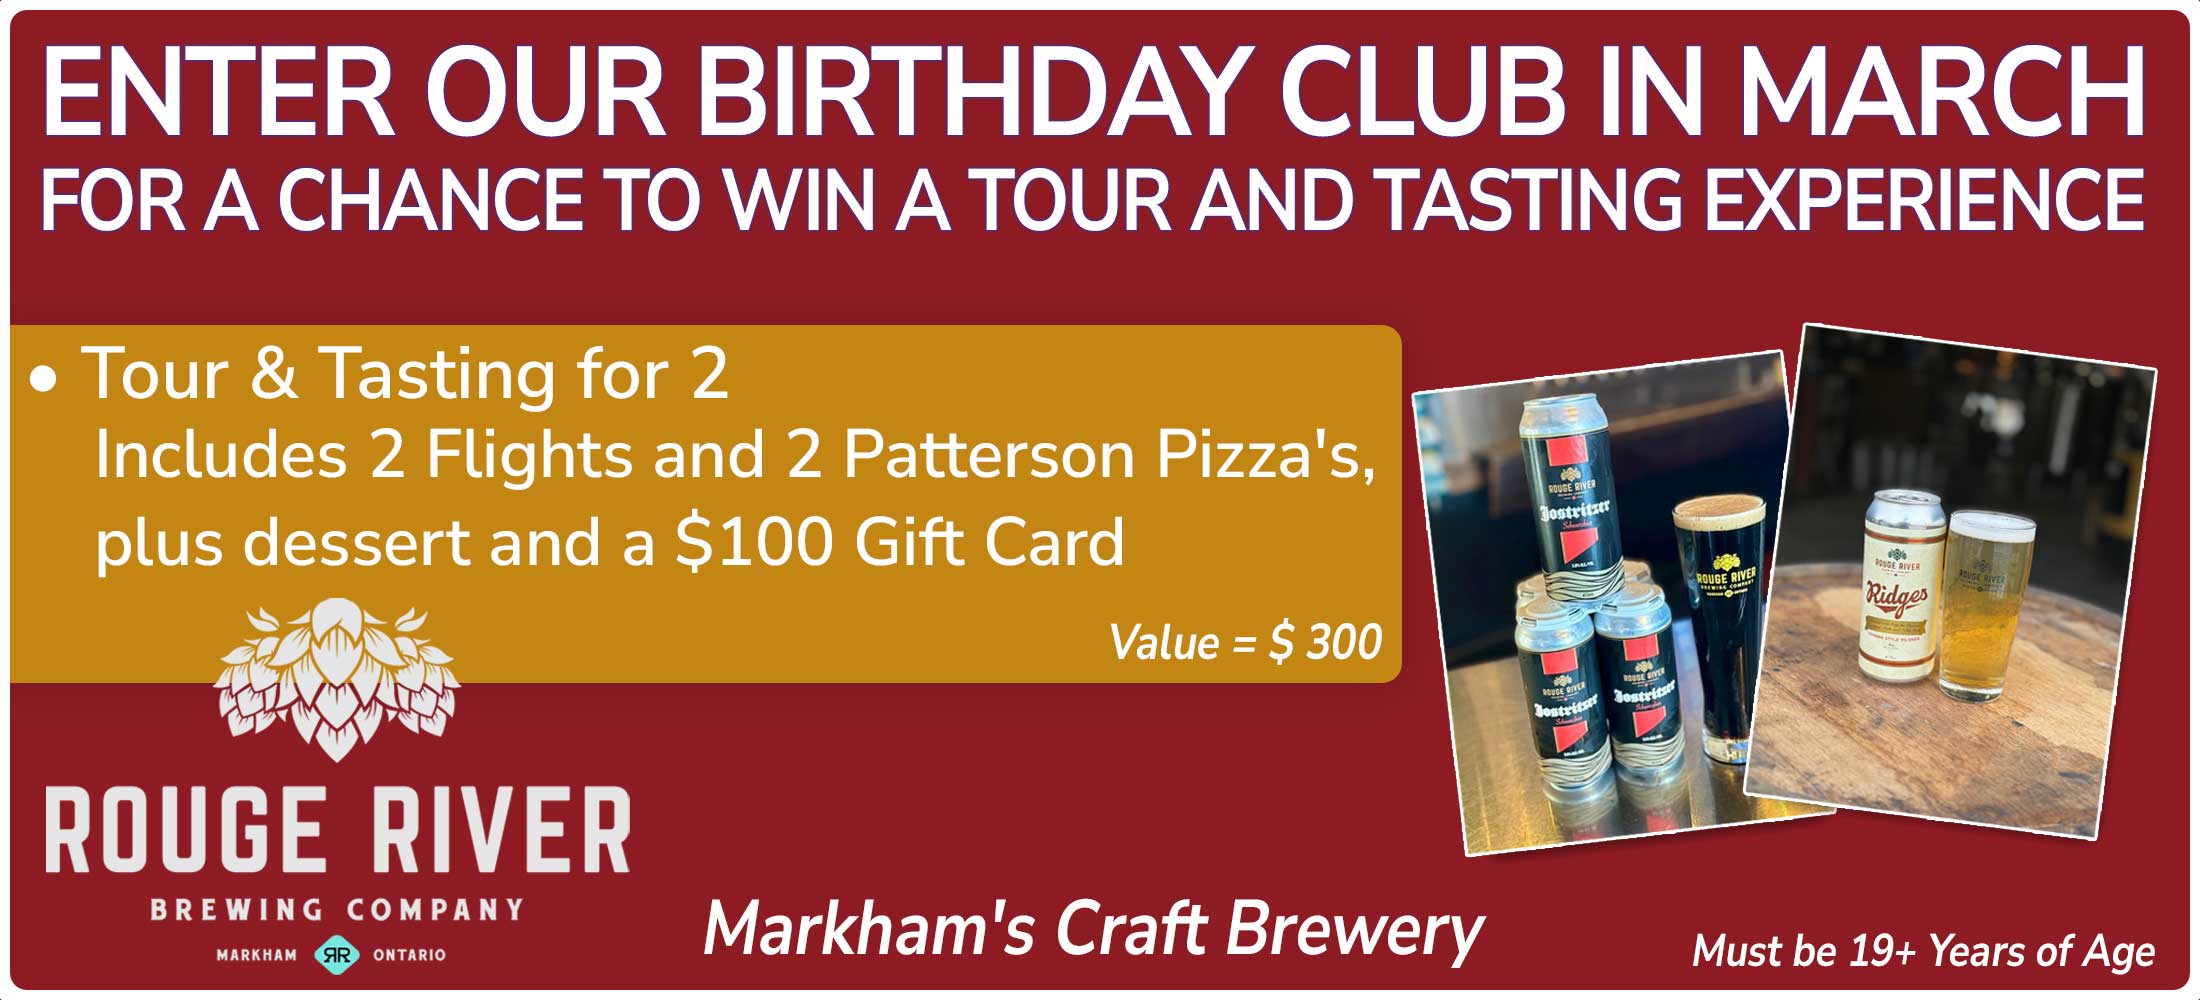 Enter Our Birthday Club in March for a Chance to Win a Tour and Tasting experience from Rouge River Brewery